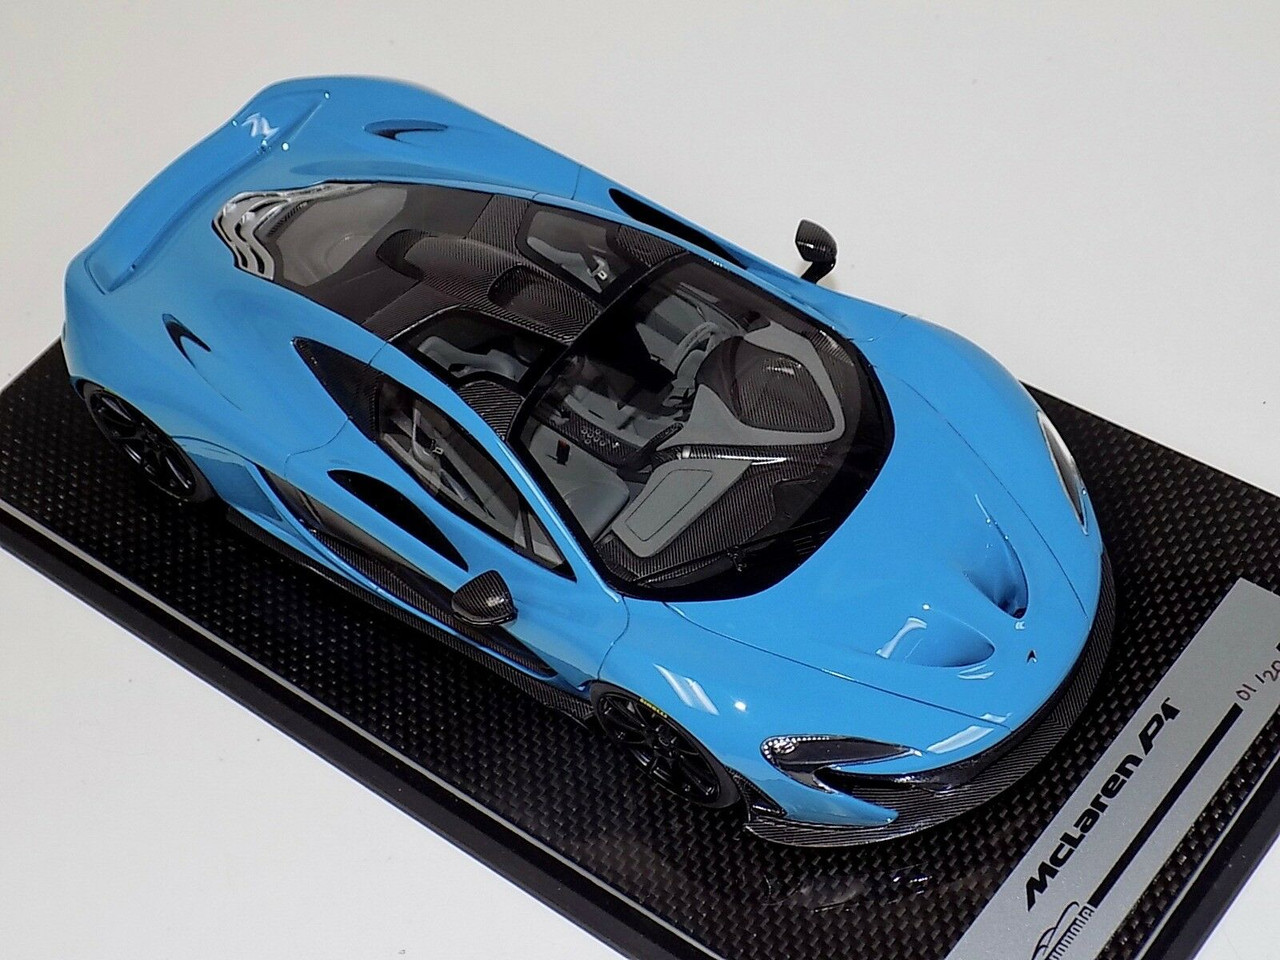 1/18 Tecnomodel McLaren P1 (Baby Blue with Black Wheels) with Carbon Base Resin Car Model Limited 01/20